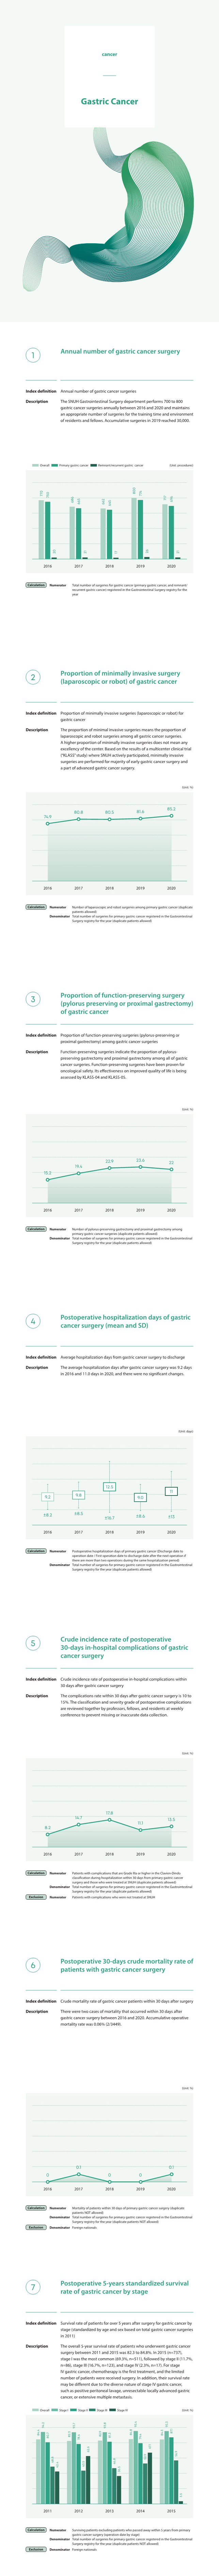 gastric cancer, Annual number of gastric cancer surgeries, The SNUH Gastrointestinal Surgery department performs 700 to 800 gastric cancer surgeries annually between 2016 and 2020 and maintains an appropriate number of surgeries for the training time and environment of residents and fellows. Accumulative surgeries in 2019 reached 30,000. 